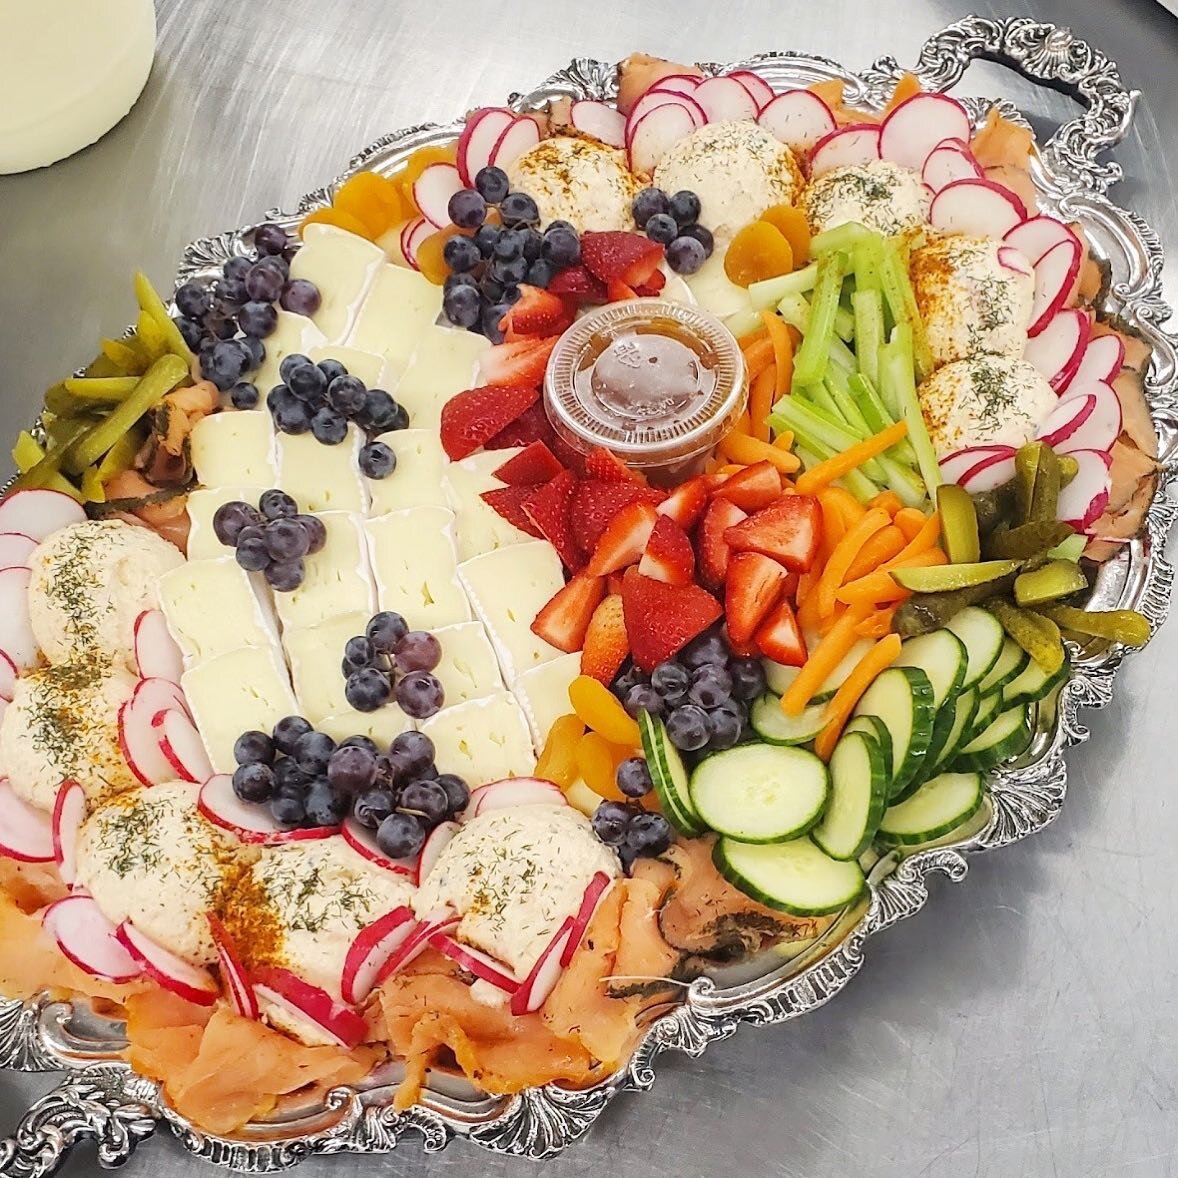 Take your spread up a notch with a beautiful platter for displaying! This client provided us with their gorgeous heirloom sterling silver trays for her party!

We can create a spread using your serving dishes, or ours! 🧀 🍇